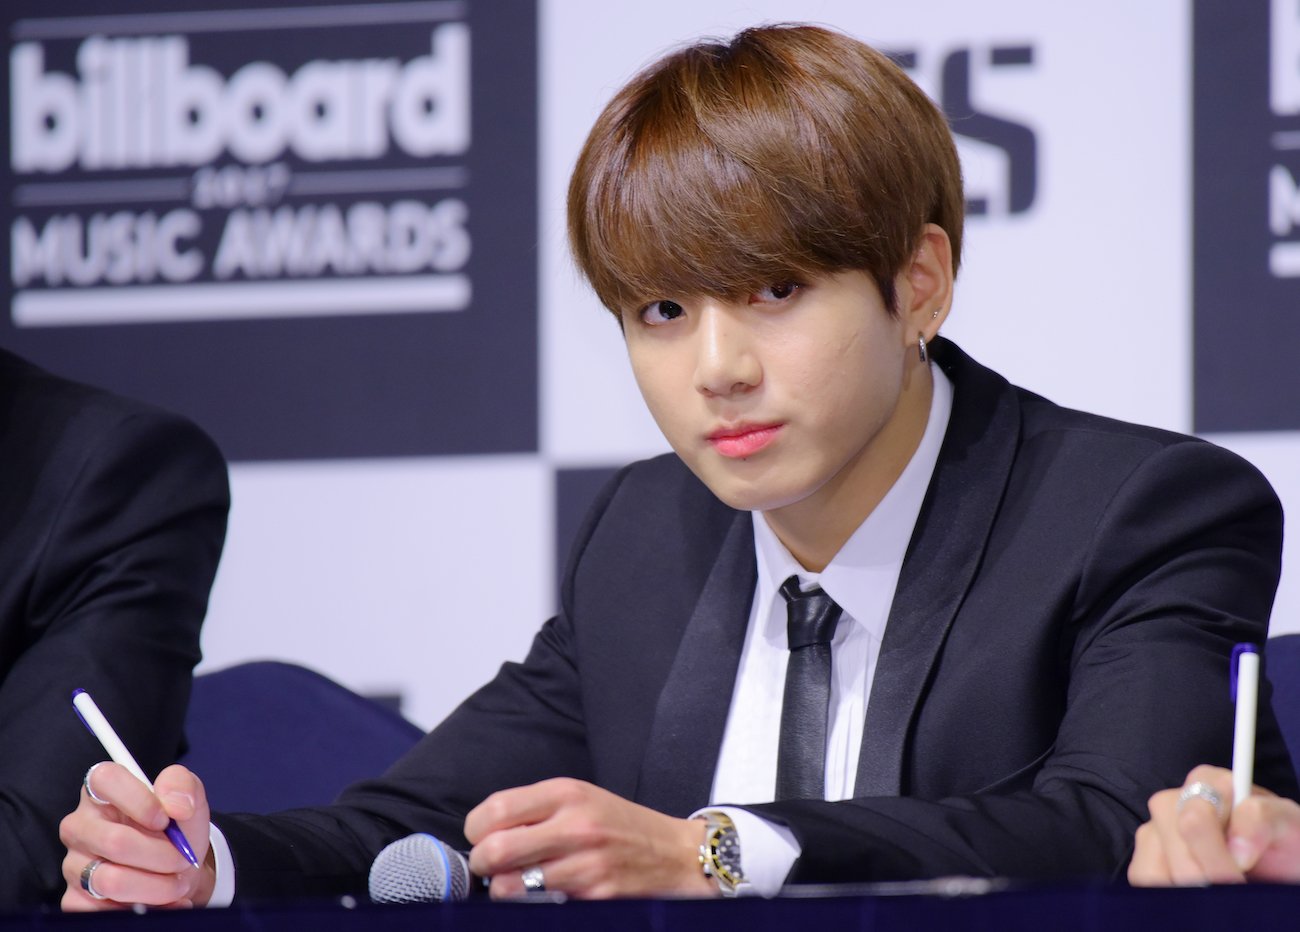 BTS member Jungkook wearing a suit and looking on in front of a black-and-white background